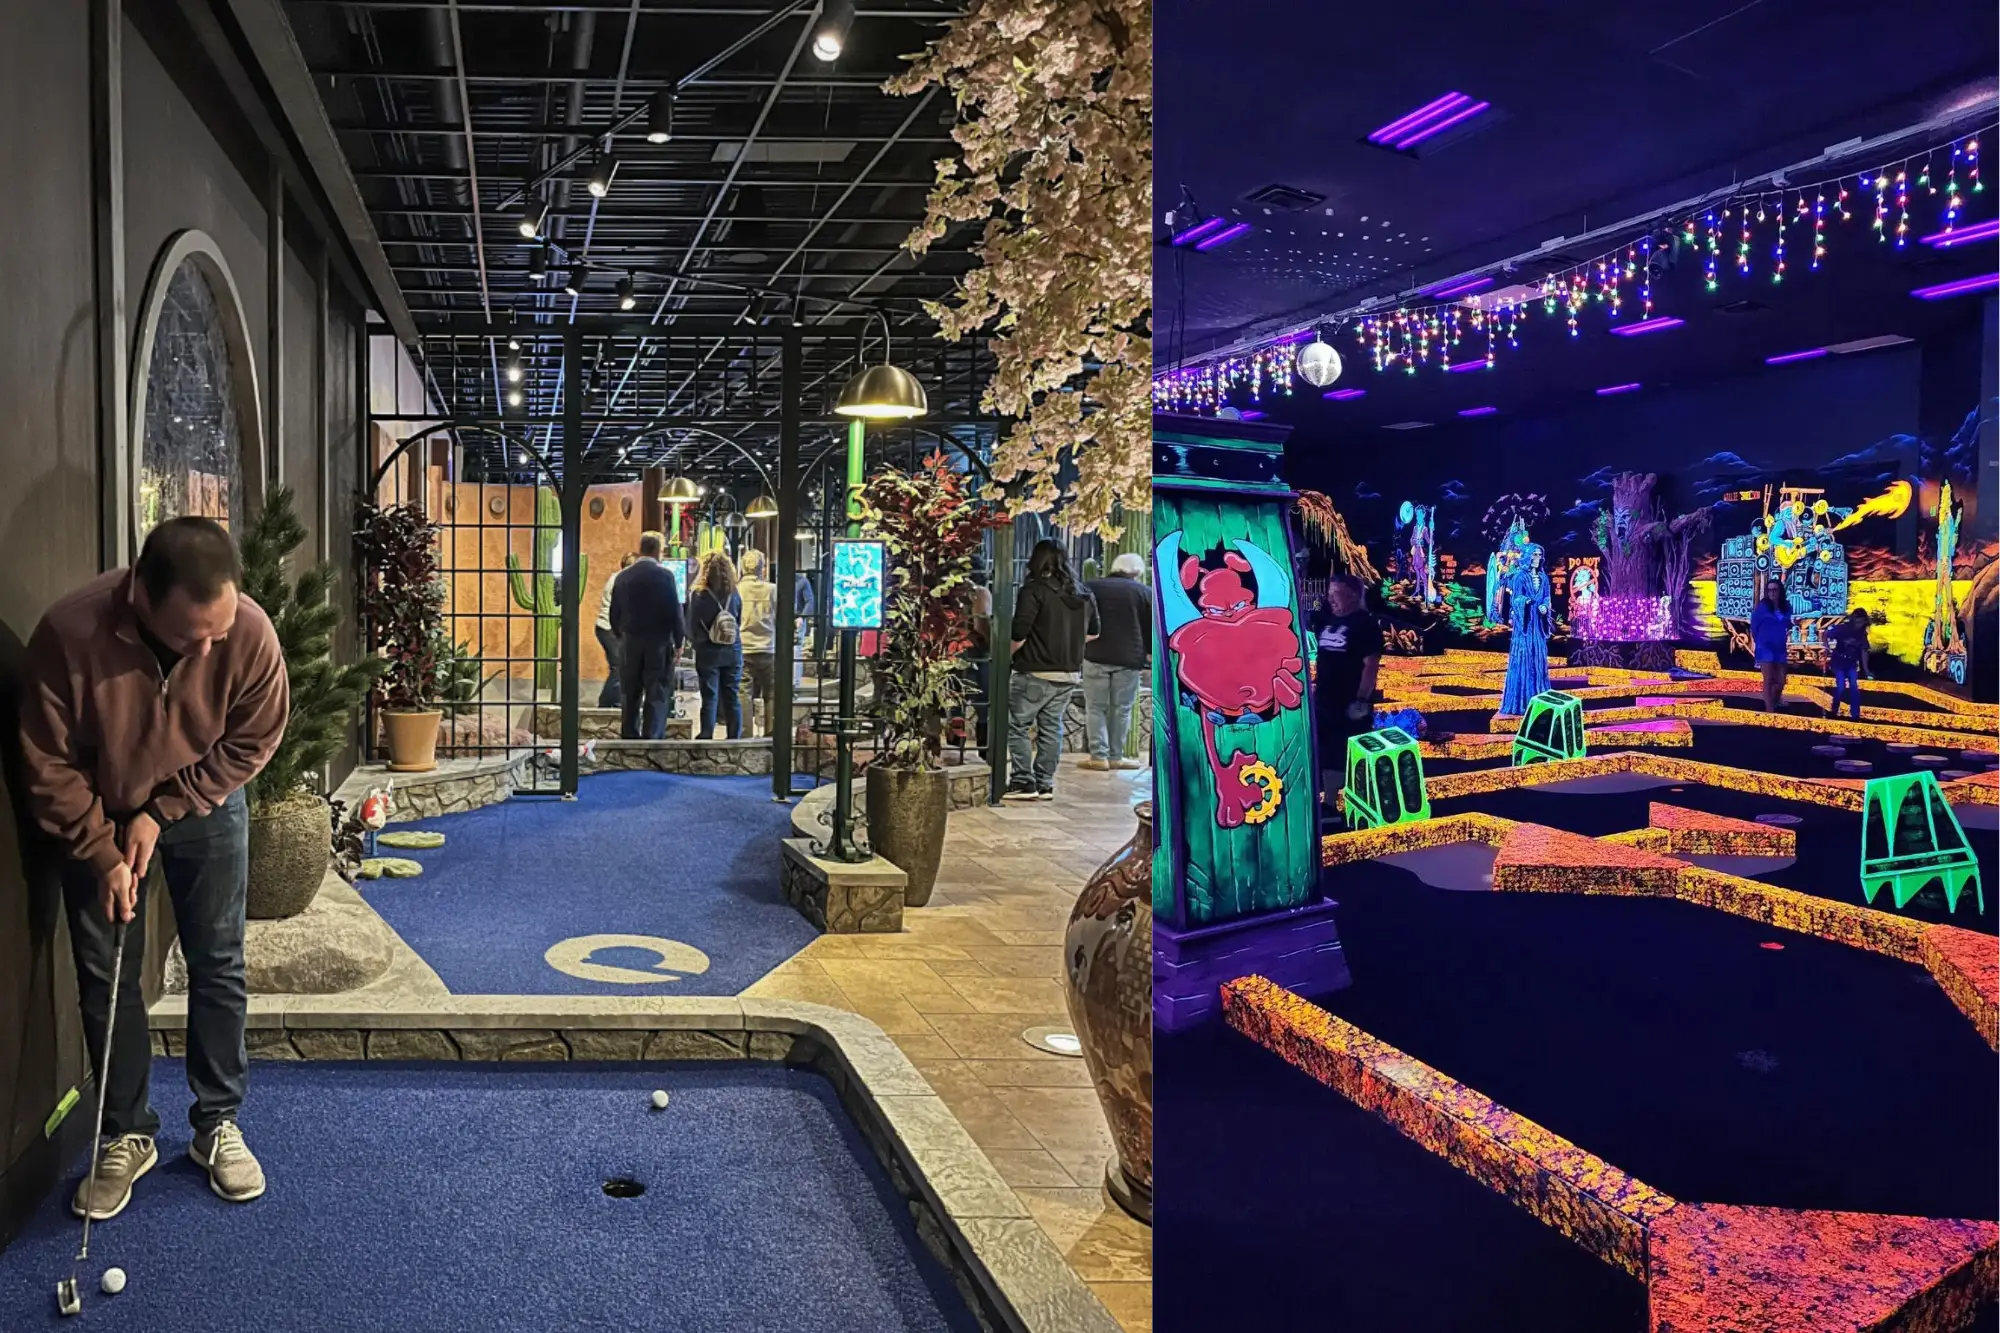 Collage of Puttery and Monster Mini Golf, which shows the best options for indoor putt putt Charlotte NC